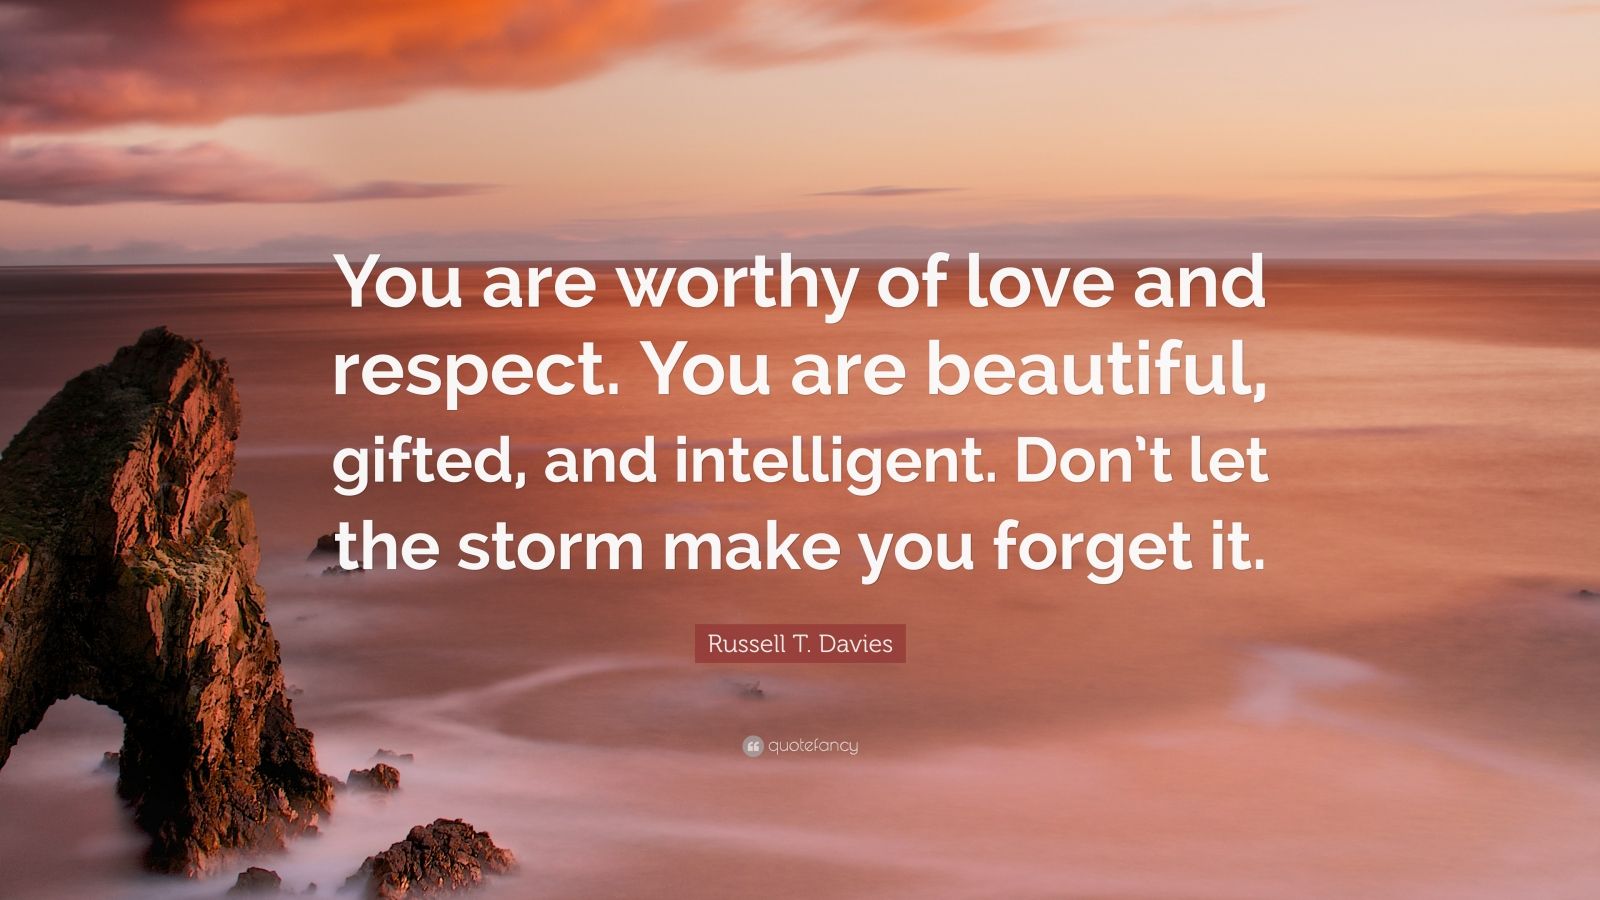 Russell T. Davies Quote: “You are worthy of love and respect. You are